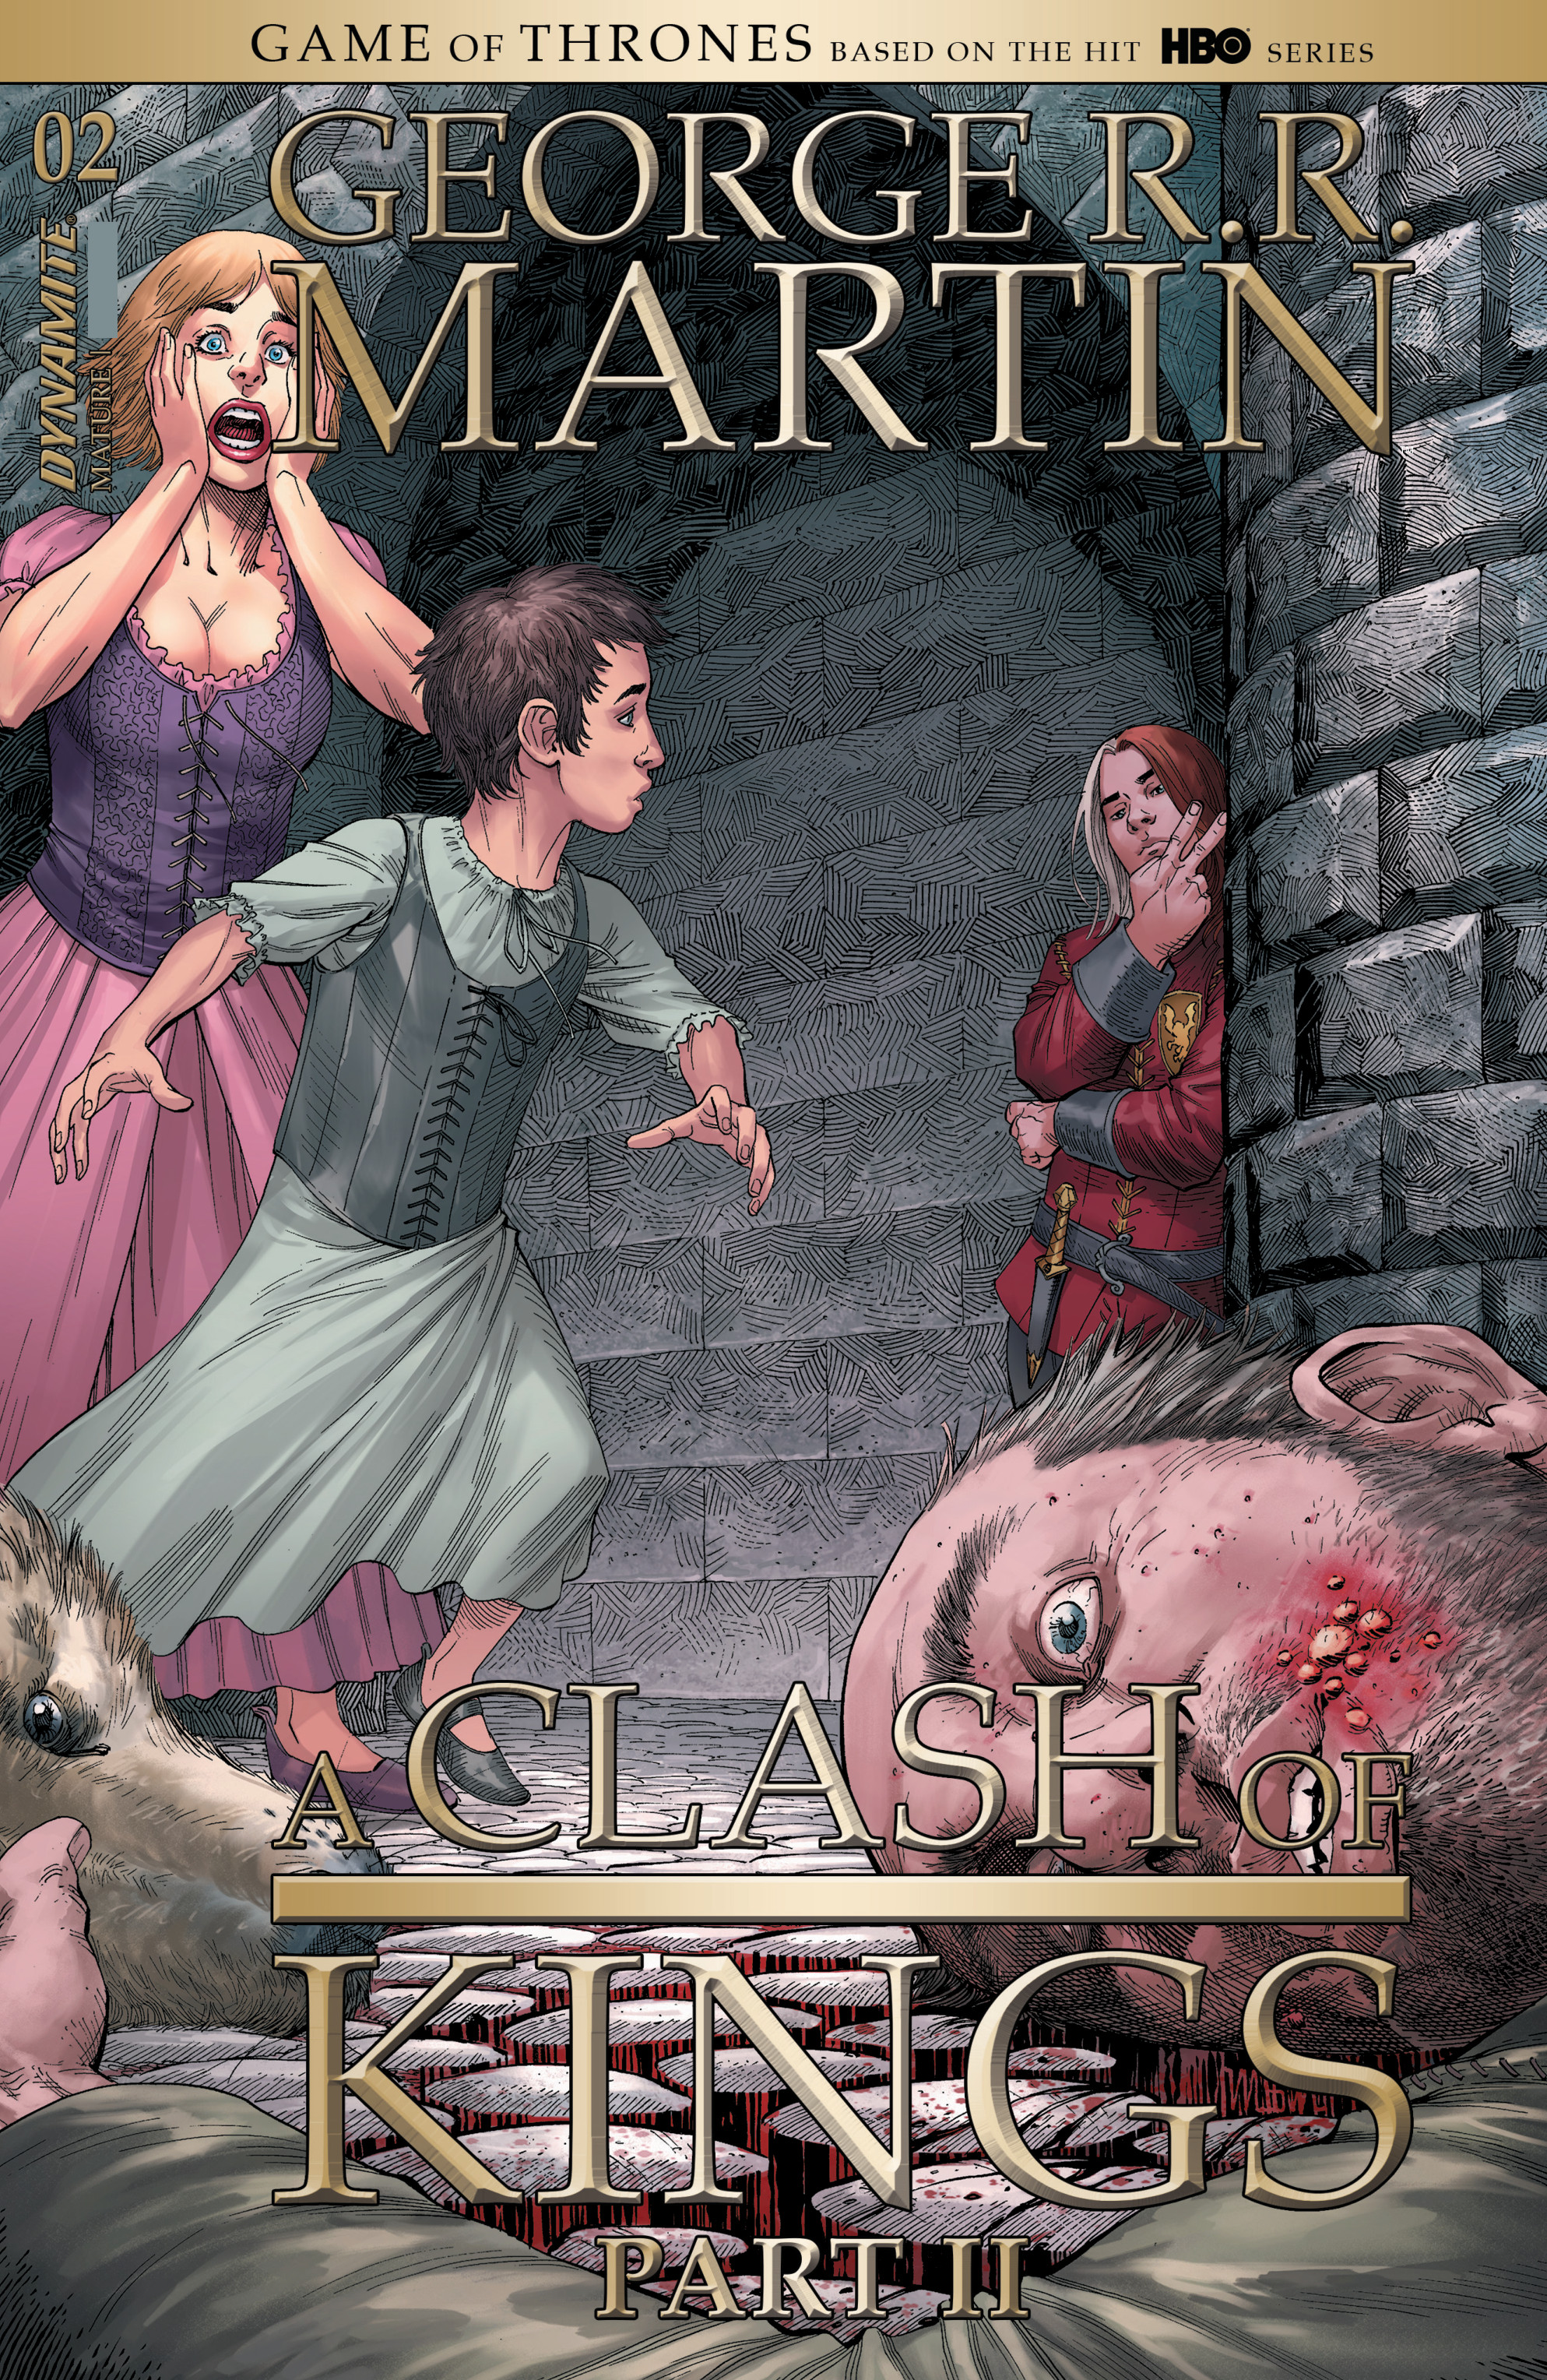 A Clash of Kings: Graphic Novel Vol 3 by George R. R. Martin 